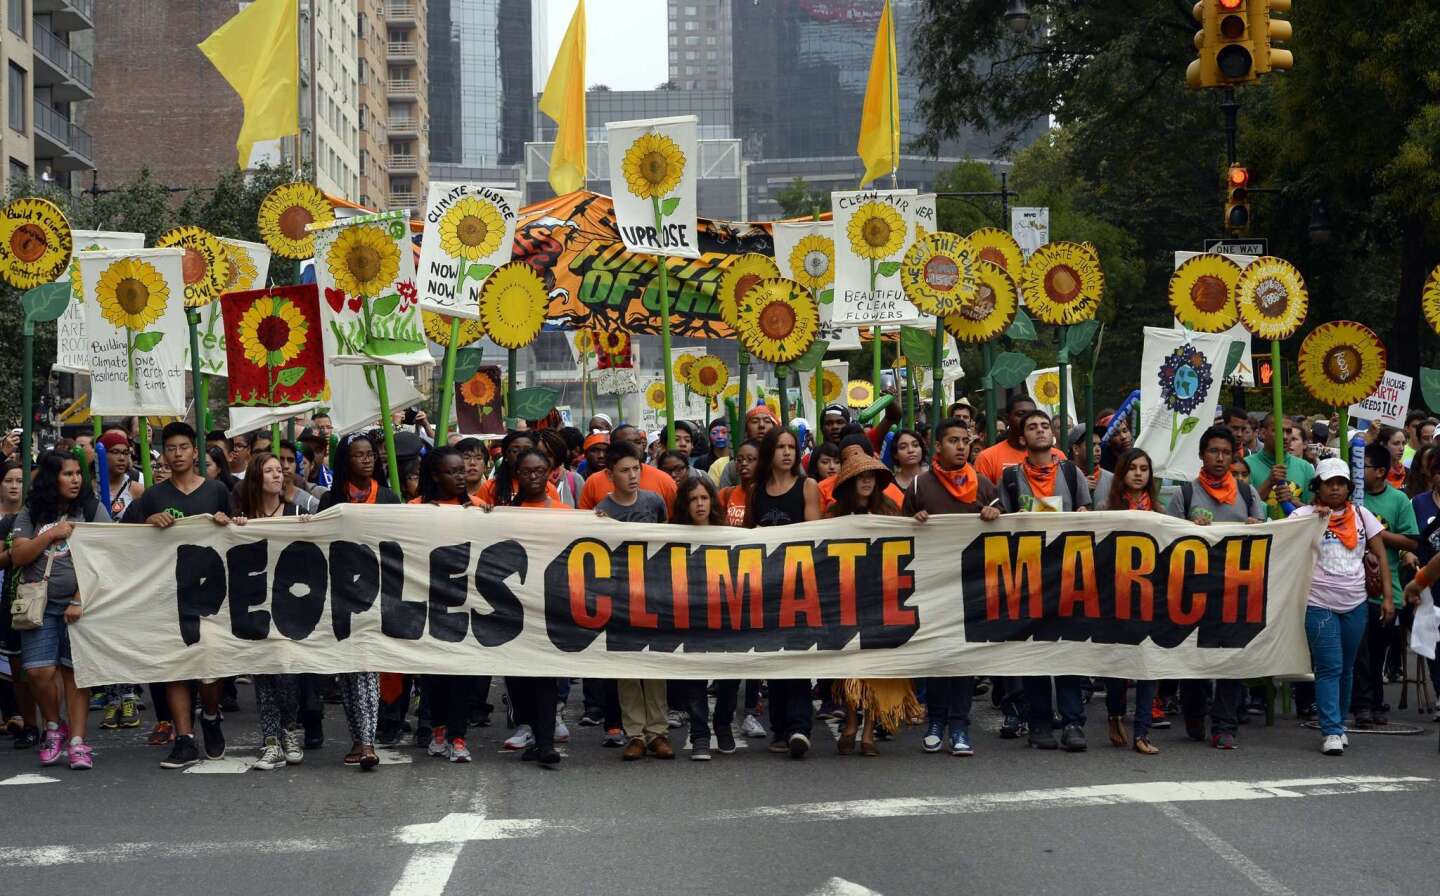 NYC climate march